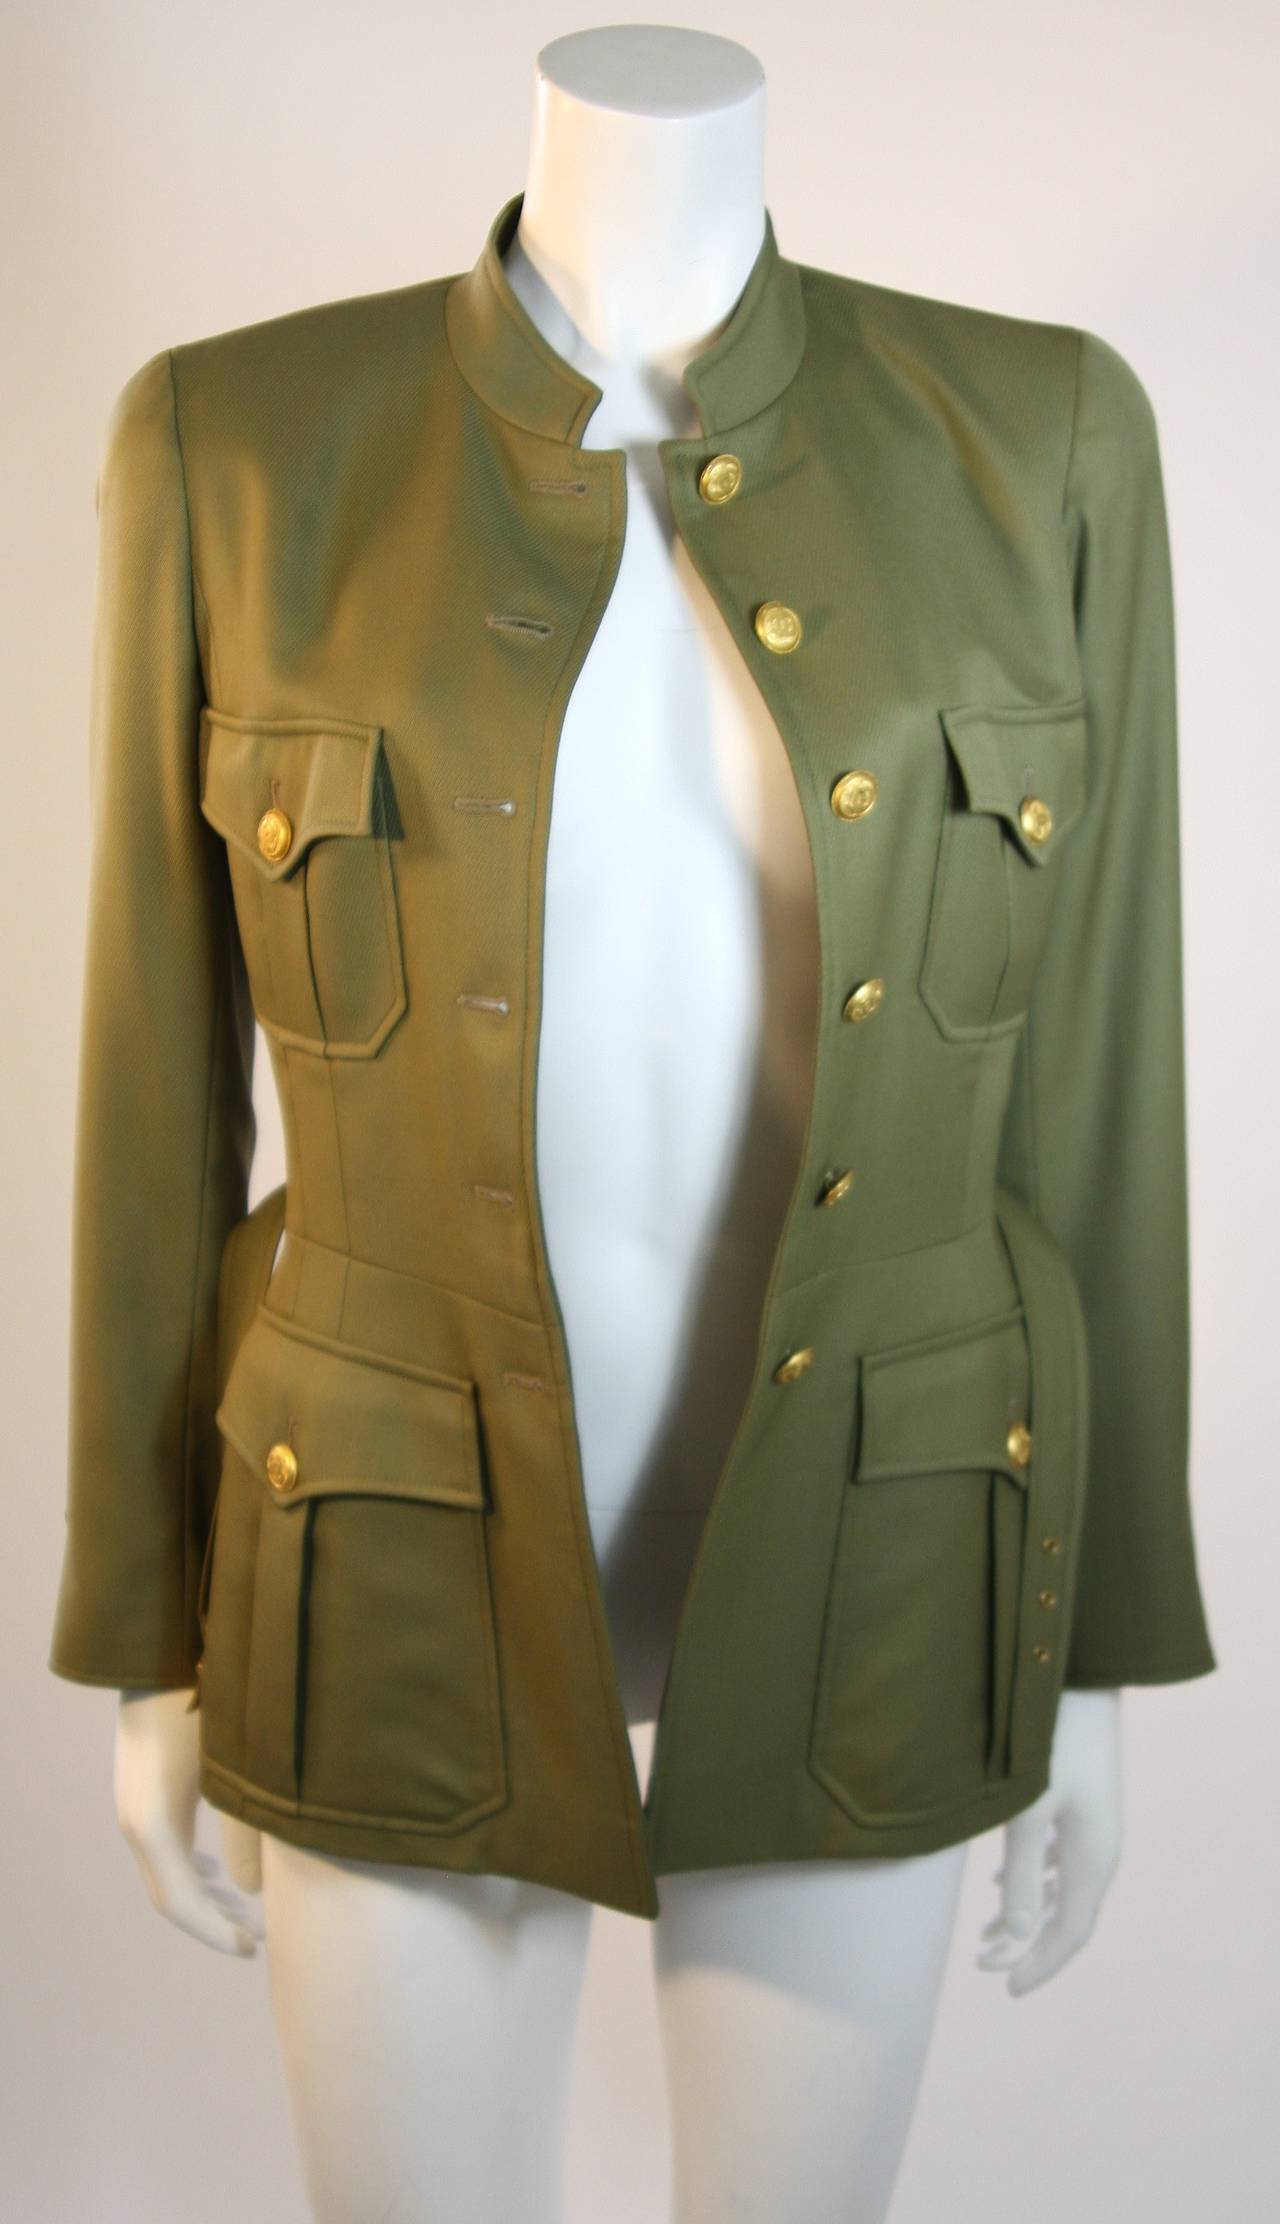 Chanel 96A Military Inspired Army Green Light Wool Jacket & Pants Suit with Belt 2